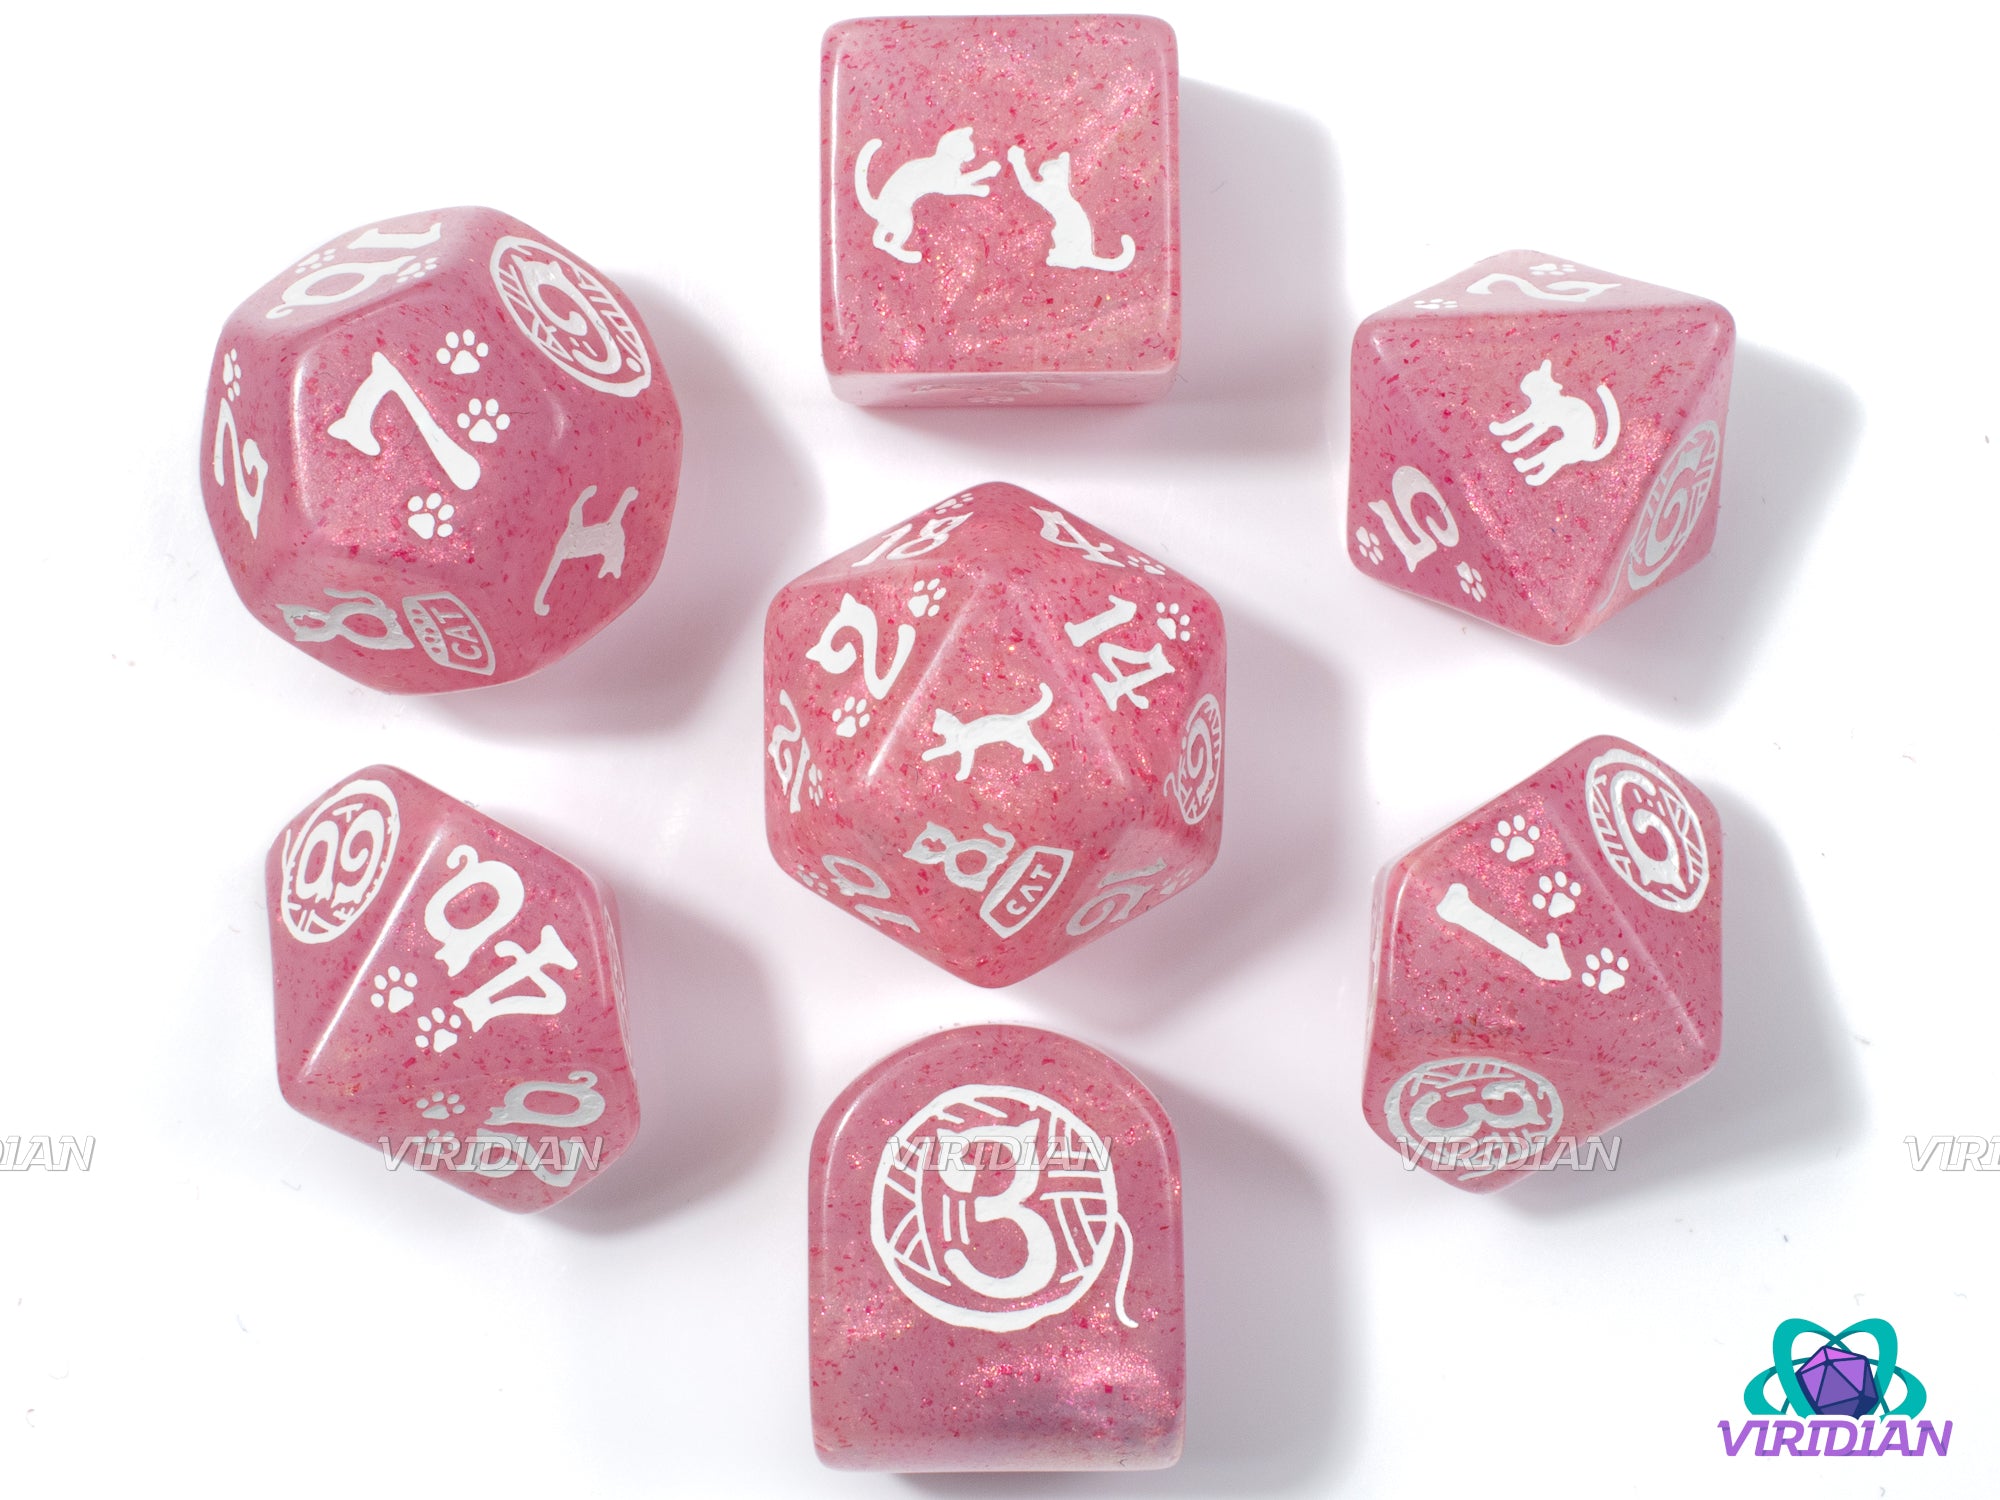 Cats: Daisy | Shimmering Pink and White Cat Themed | Acrylic Dice Set (7)